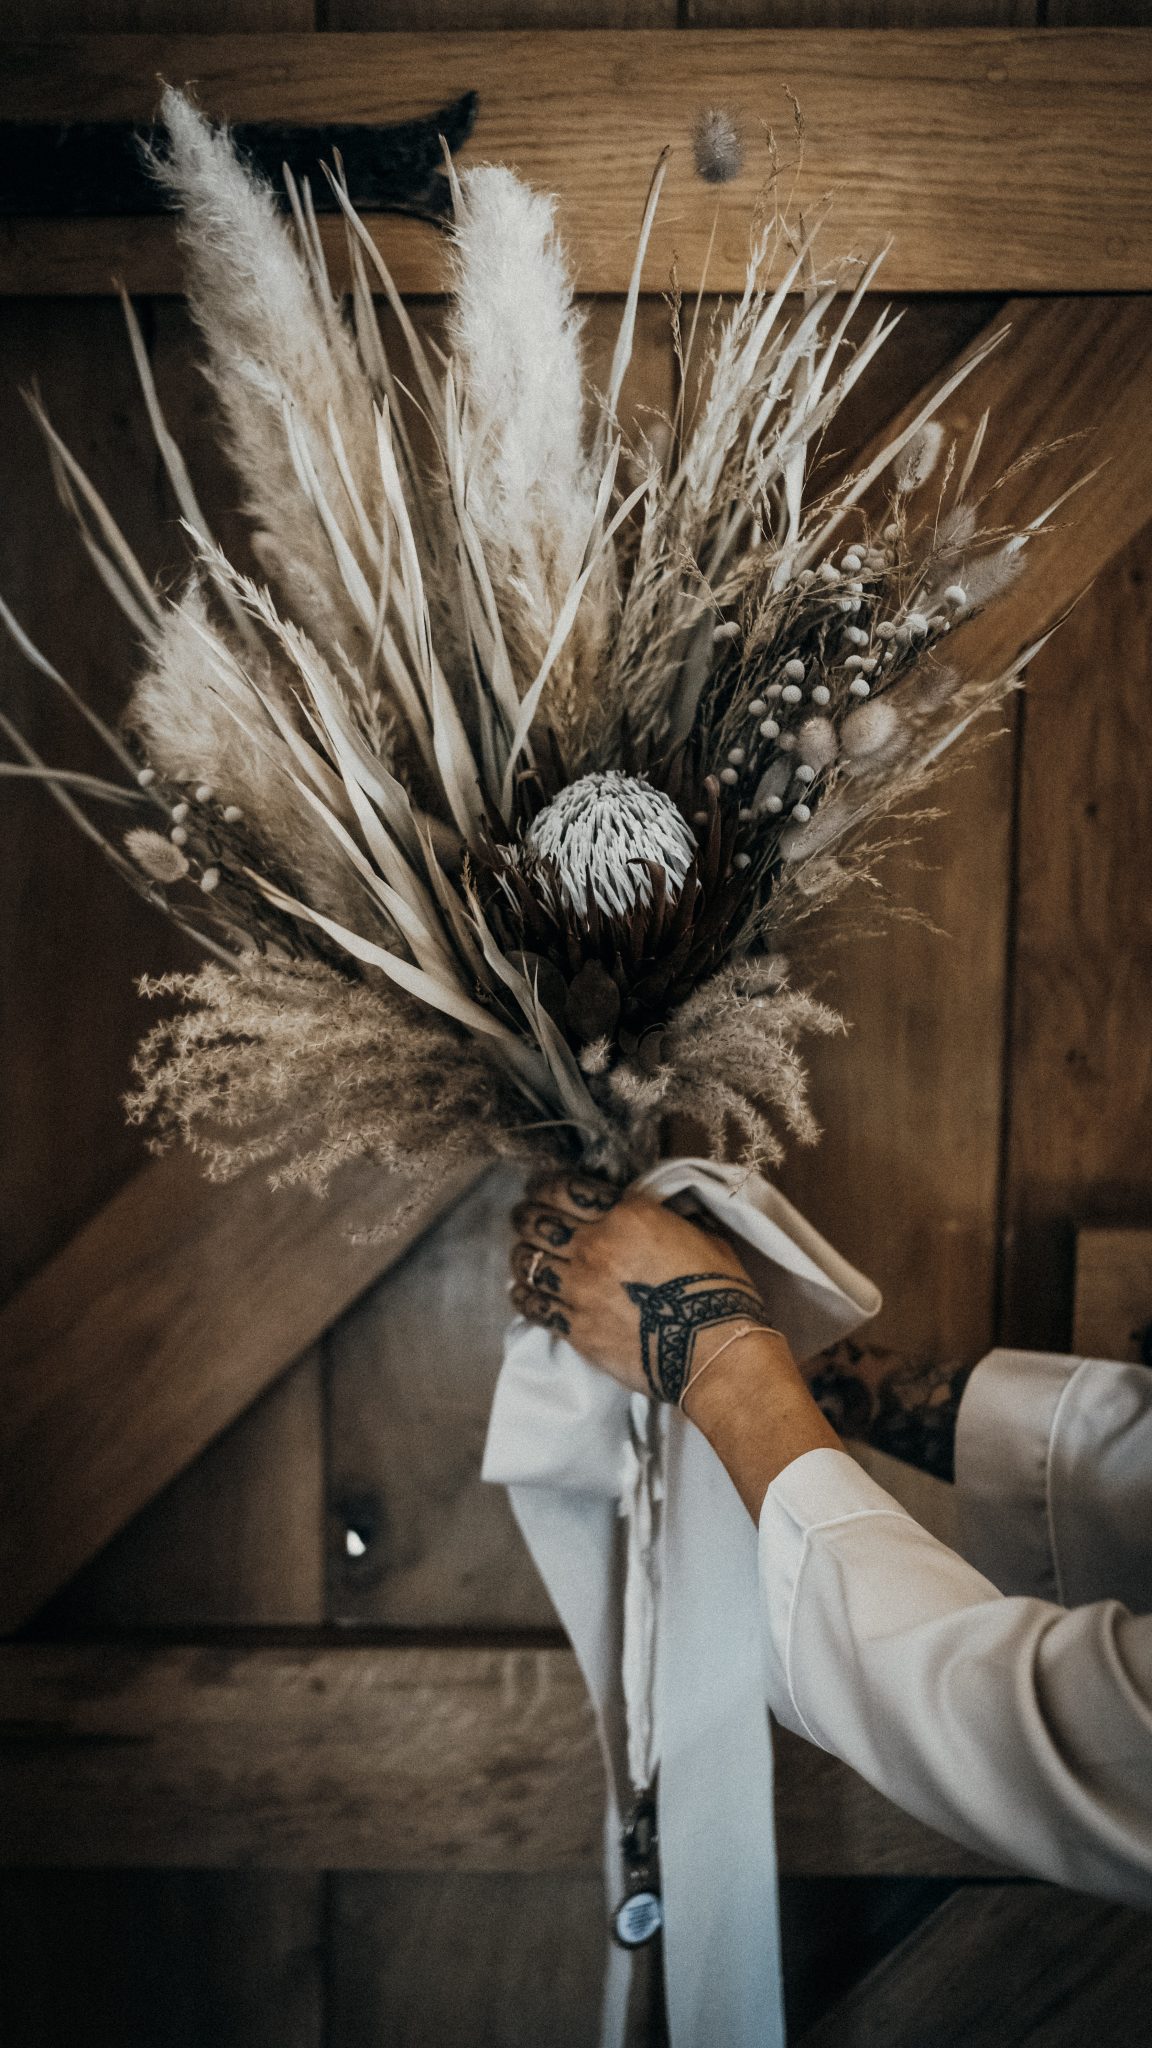 Cain Manor bridal bouquet using pampers grass